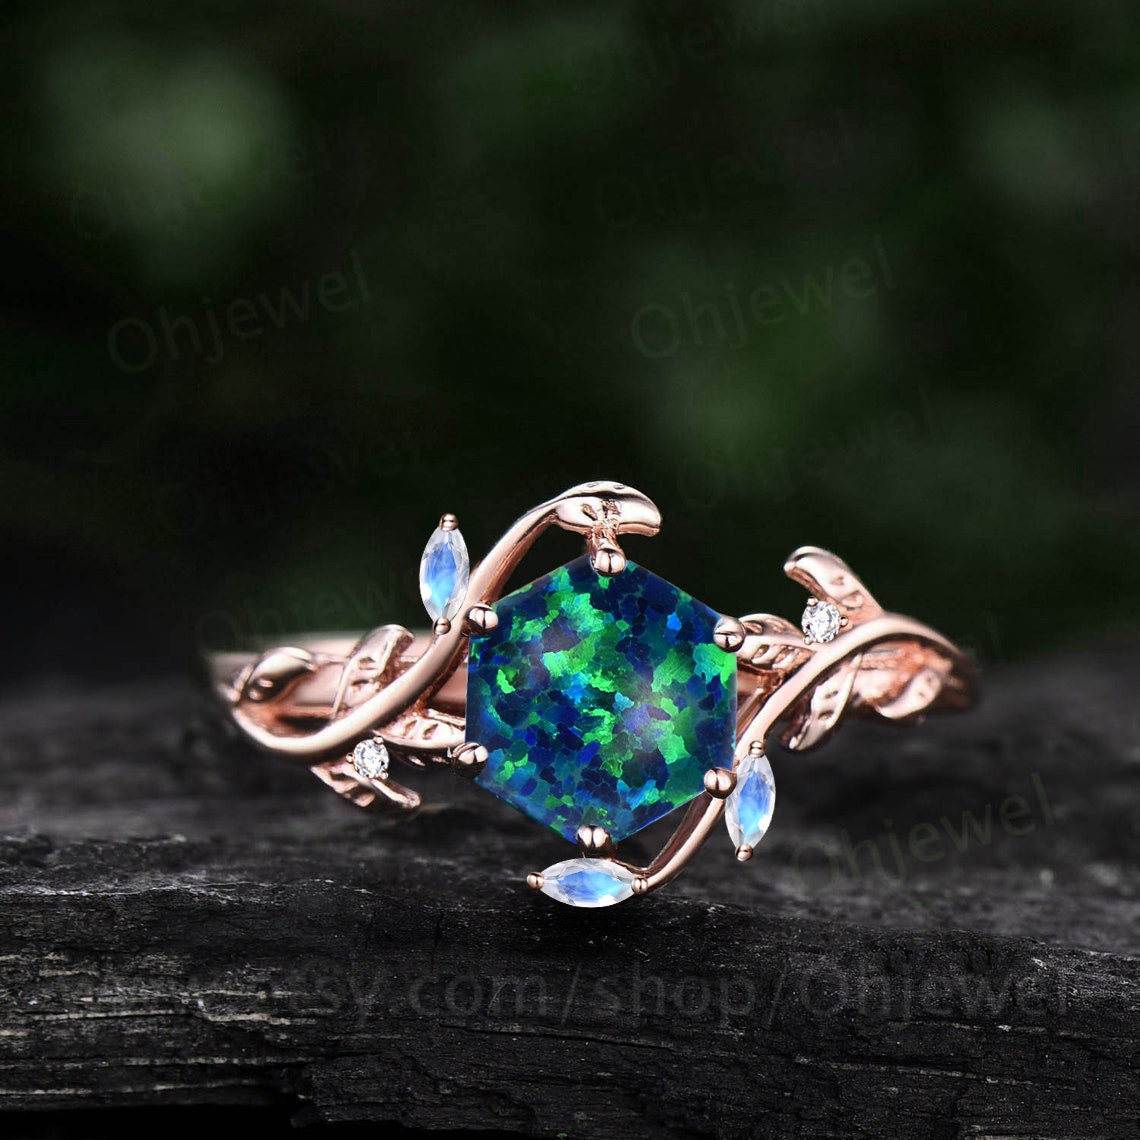 Vintage Hexagon black opal engagement ring deco nature inspired – Ohjewel